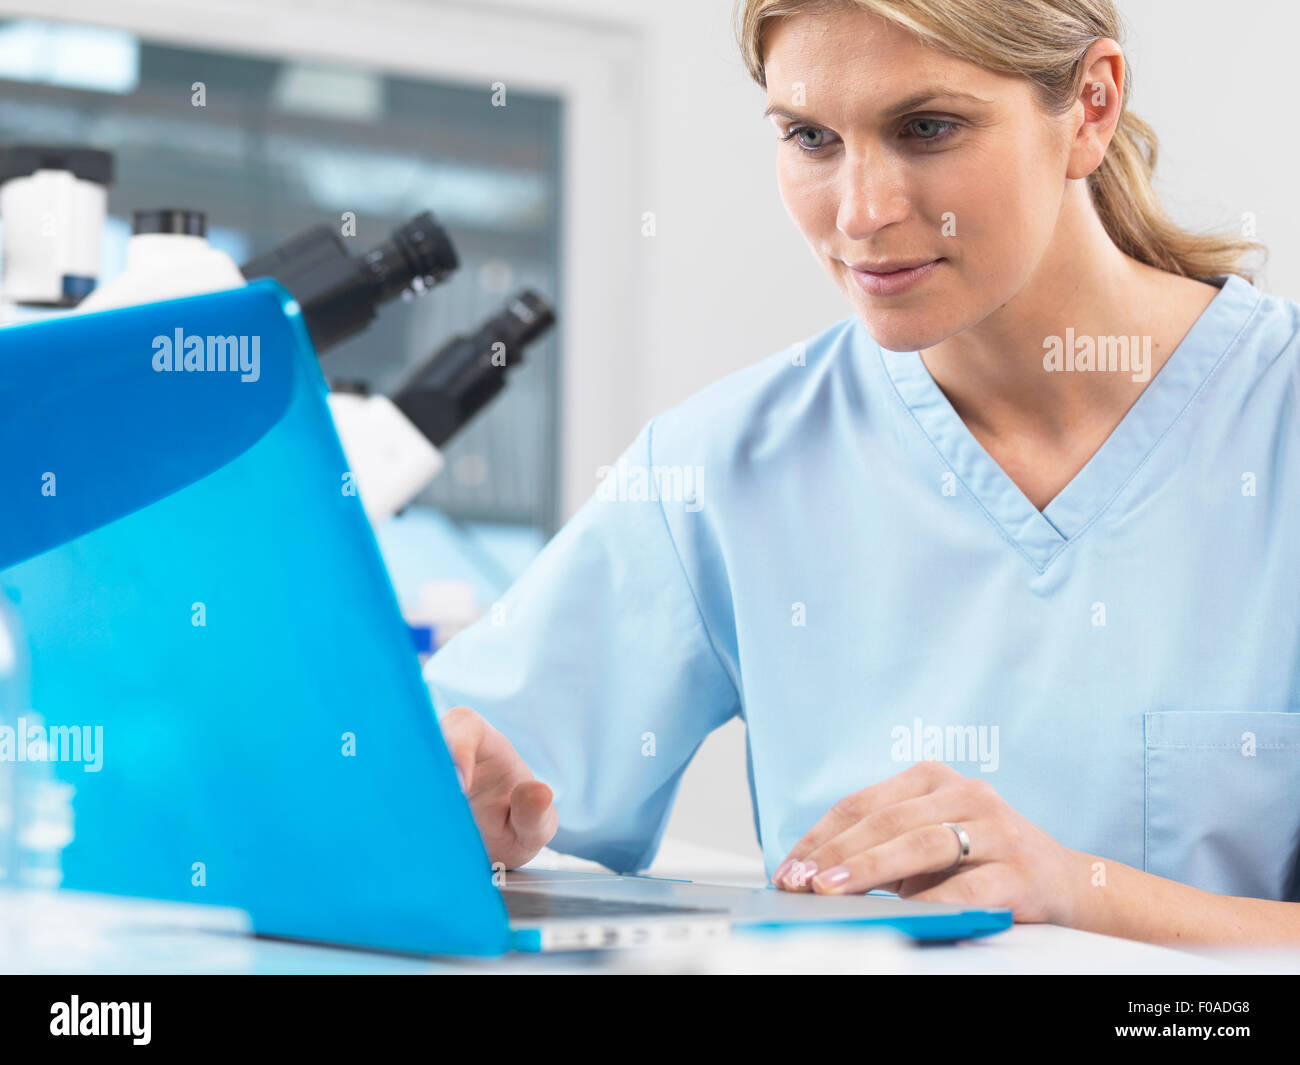 Medical scientist viewing patients test results on a computer Stock Photo